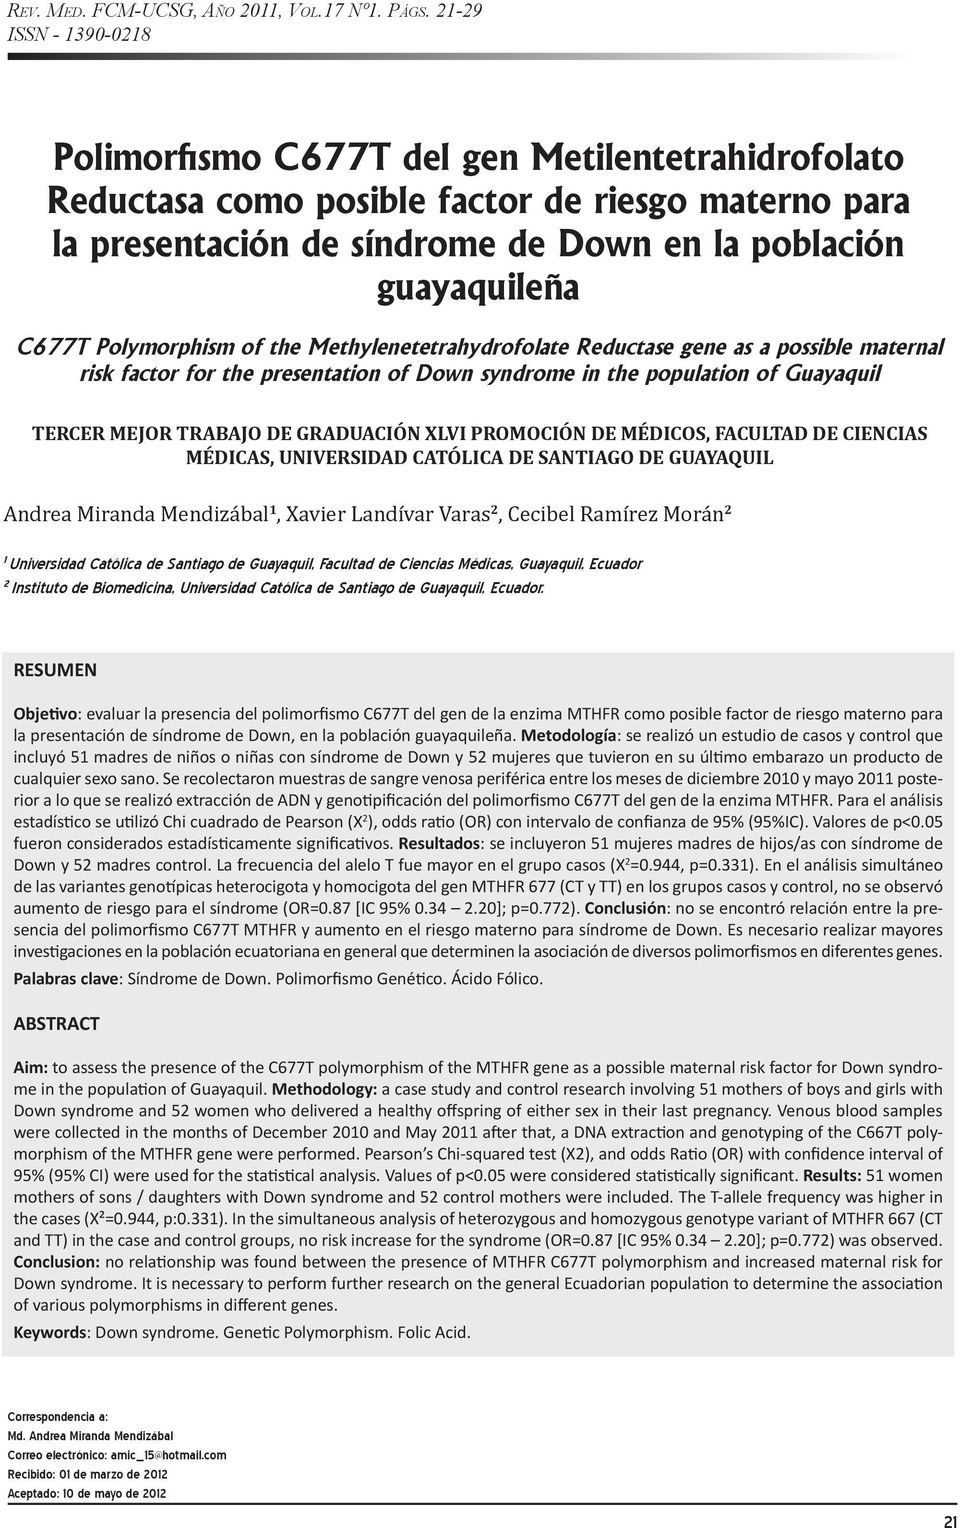 Polymorphism of the Methylenetetrahydrofolate Reductase gene as a possible maternal risk factor for the presentation of Down syndrome in the population of Guayaquil TERCER MEJOR TRABAJO DE GRADUACIÓN